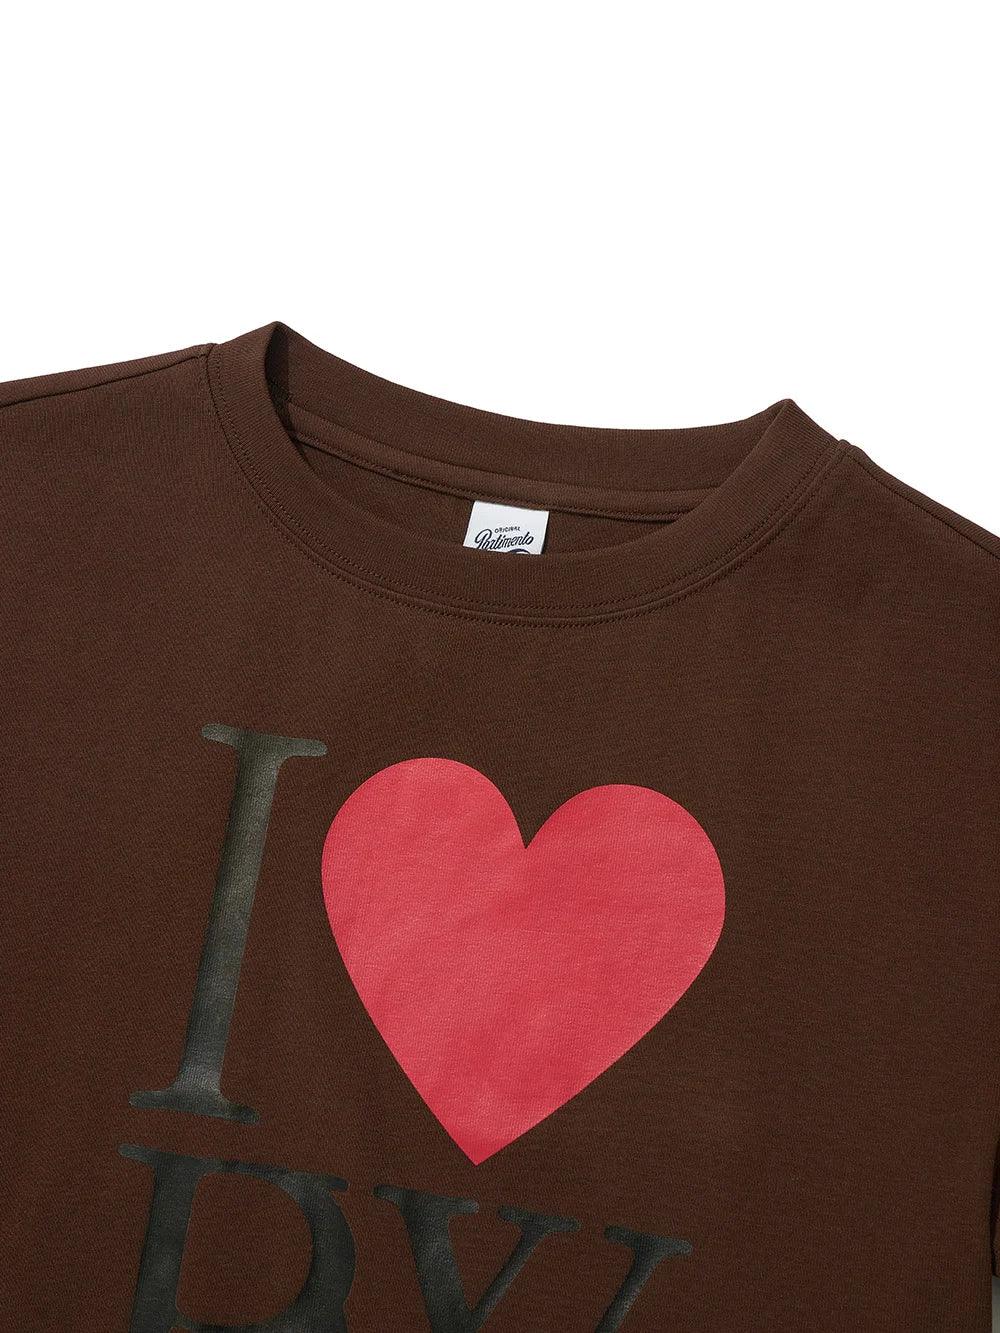 Partimento I Love PW SS T-shirt - Brown - One size -